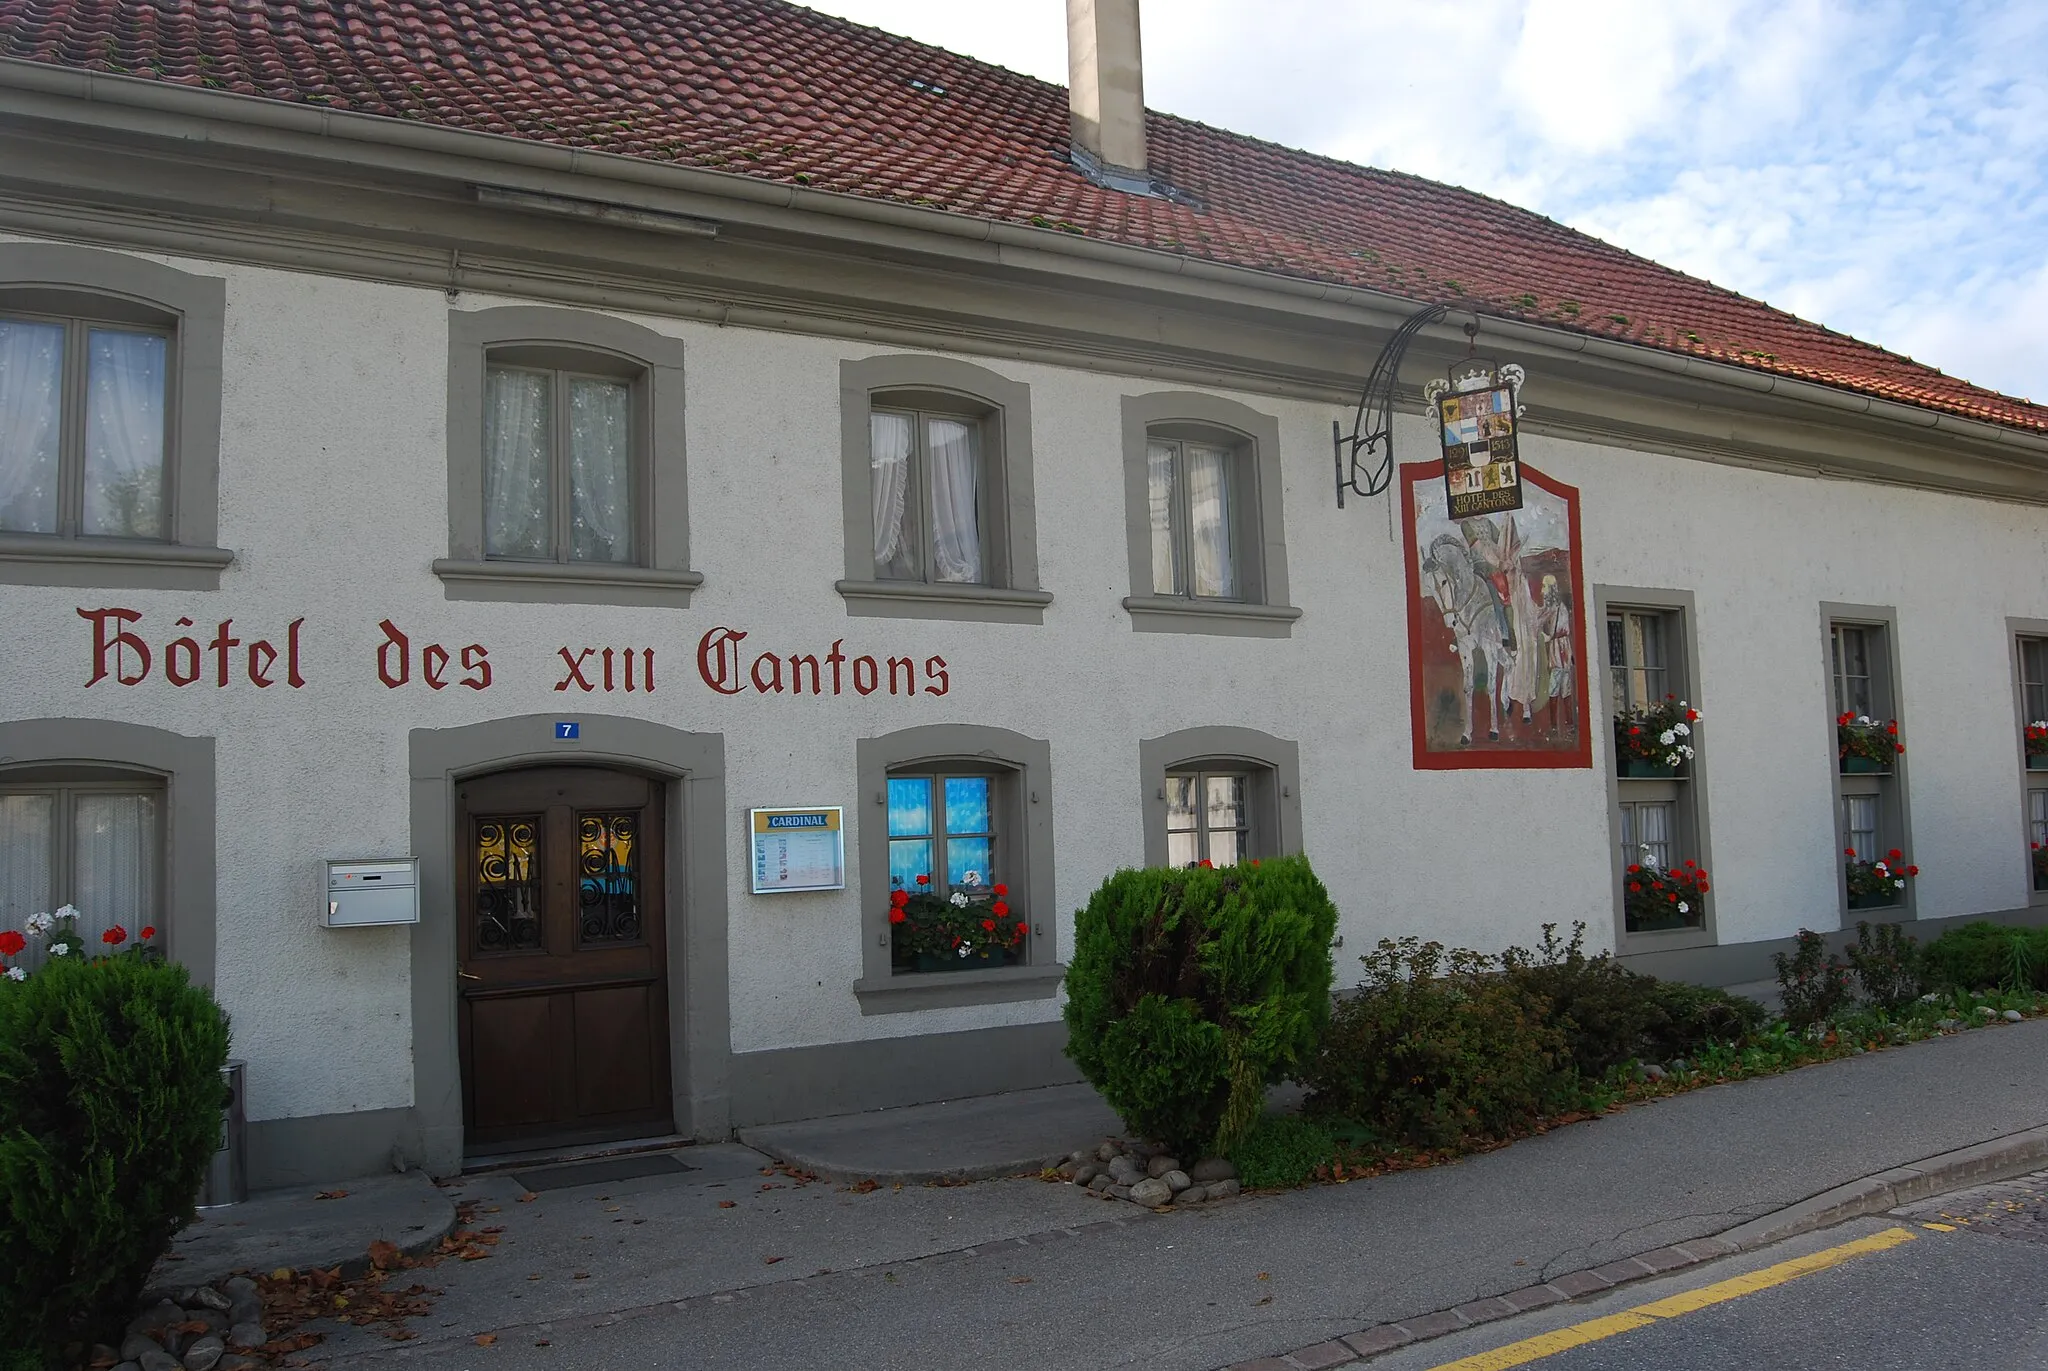 Photo showing: Hôtel des XIII Cantons at Belfaux, canton of Fribourg, Switzerland